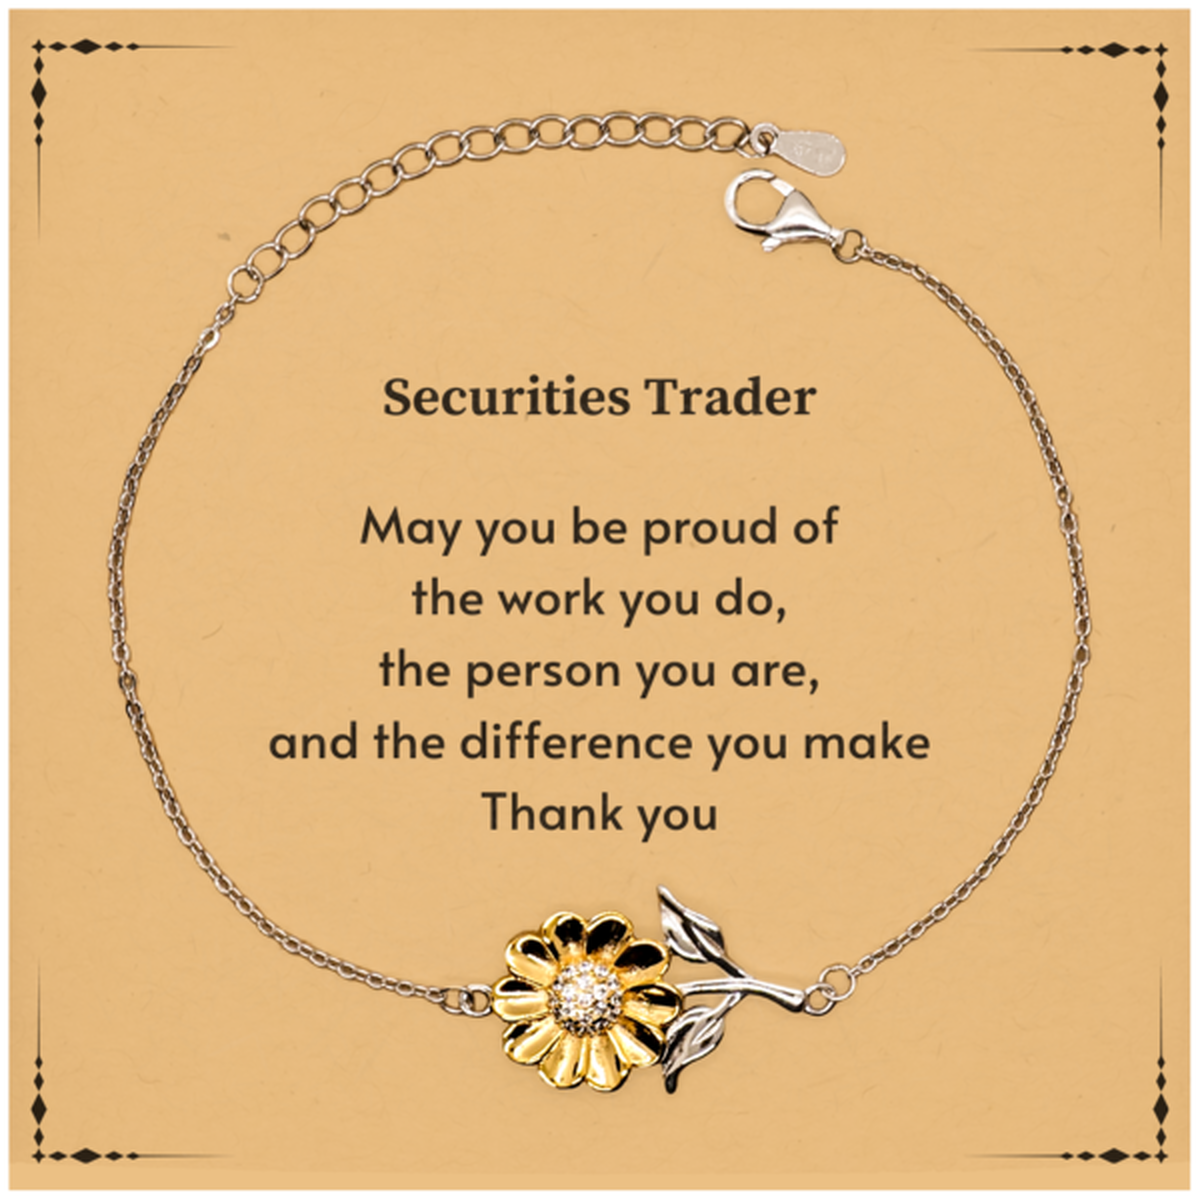 Heartwarming Sunflower Bracelet Retirement Coworkers Gifts for Securities Trader, Securities Trader May You be proud of the work you do, the person you are Gifts for Boss Men Women Friends